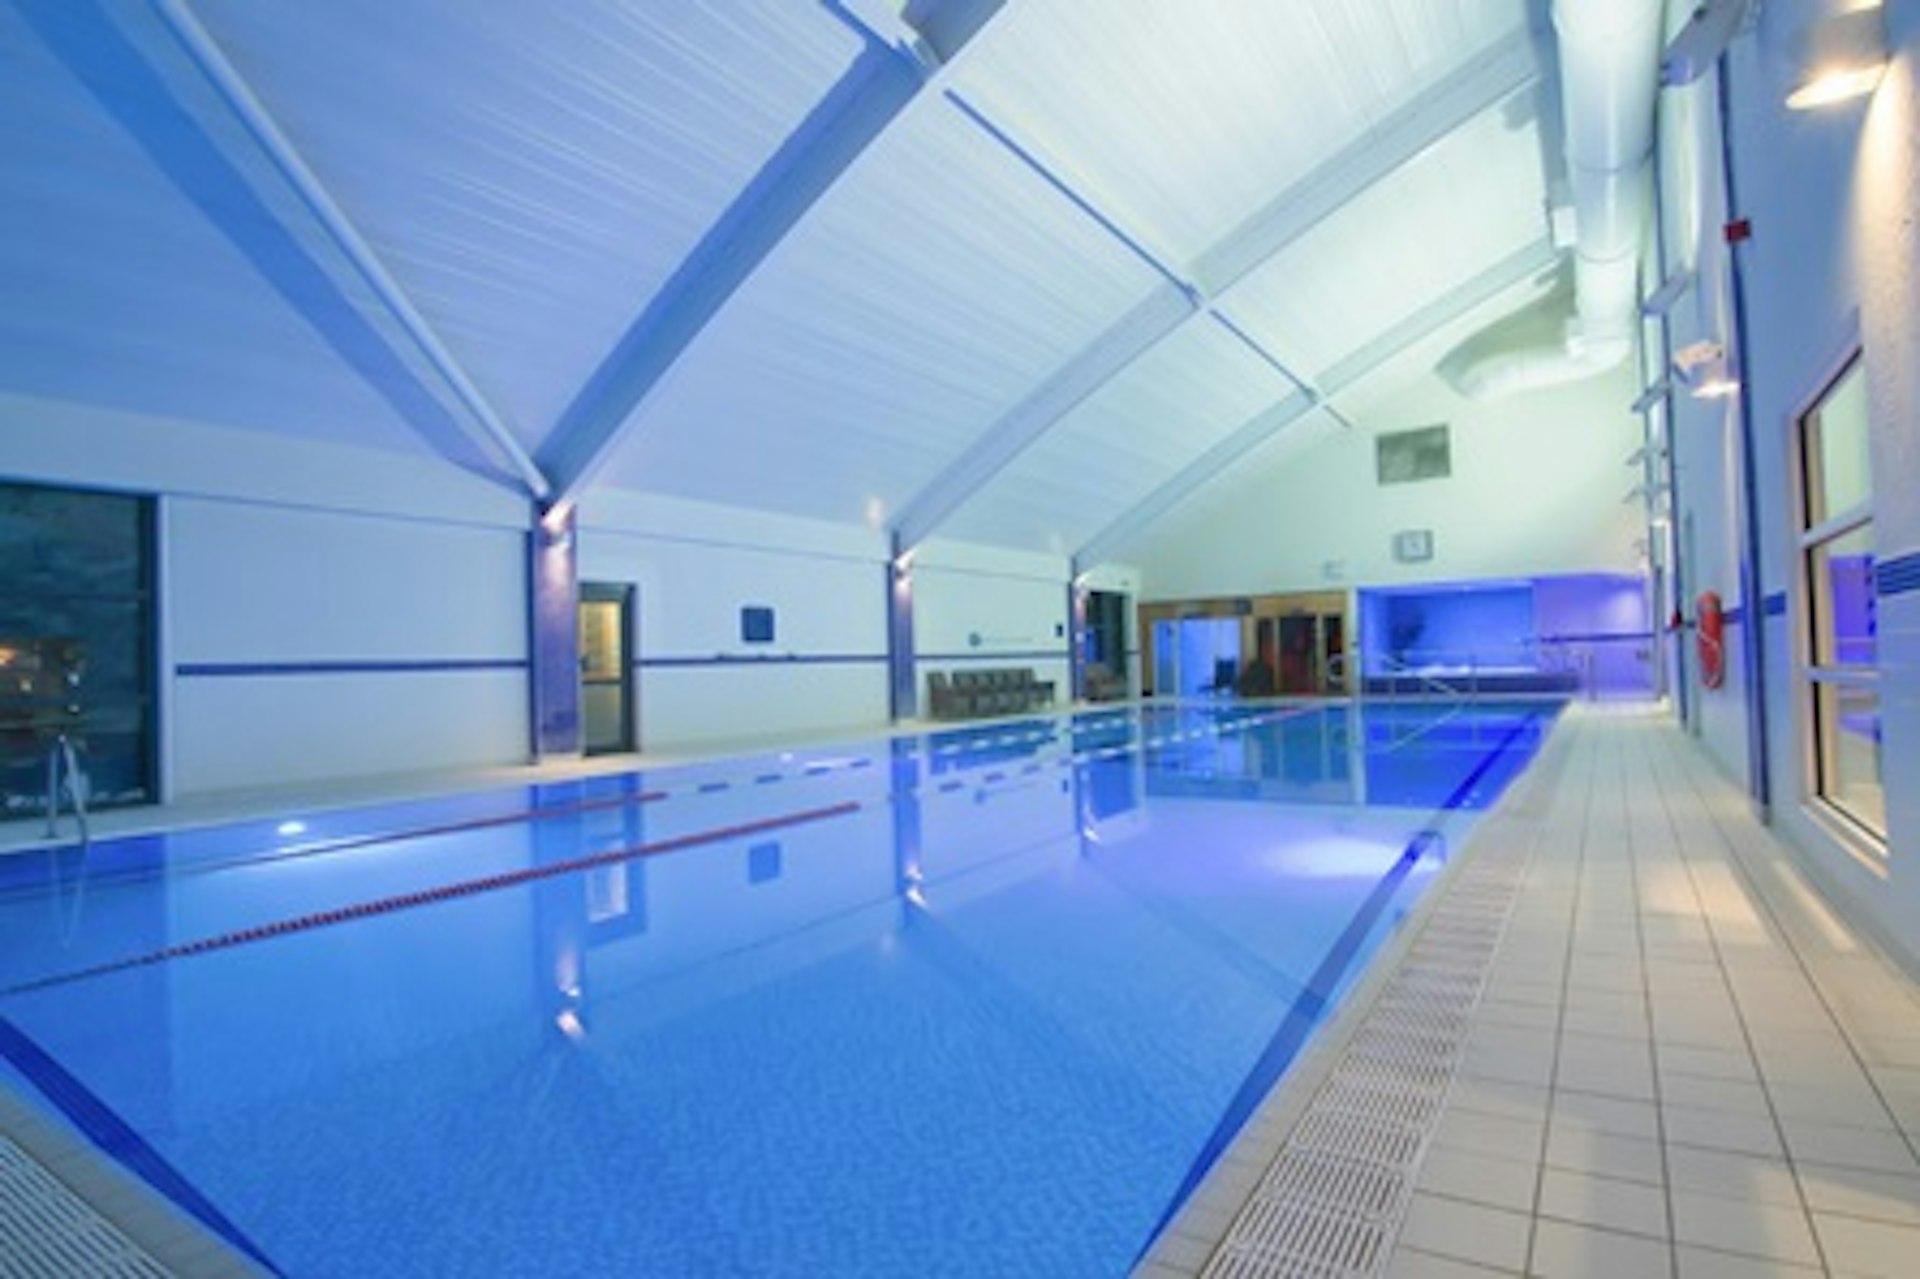 One Night Revitalising Spa Break with Dinner and Treatments for Two at Bannatyne Hastings Hotel 1